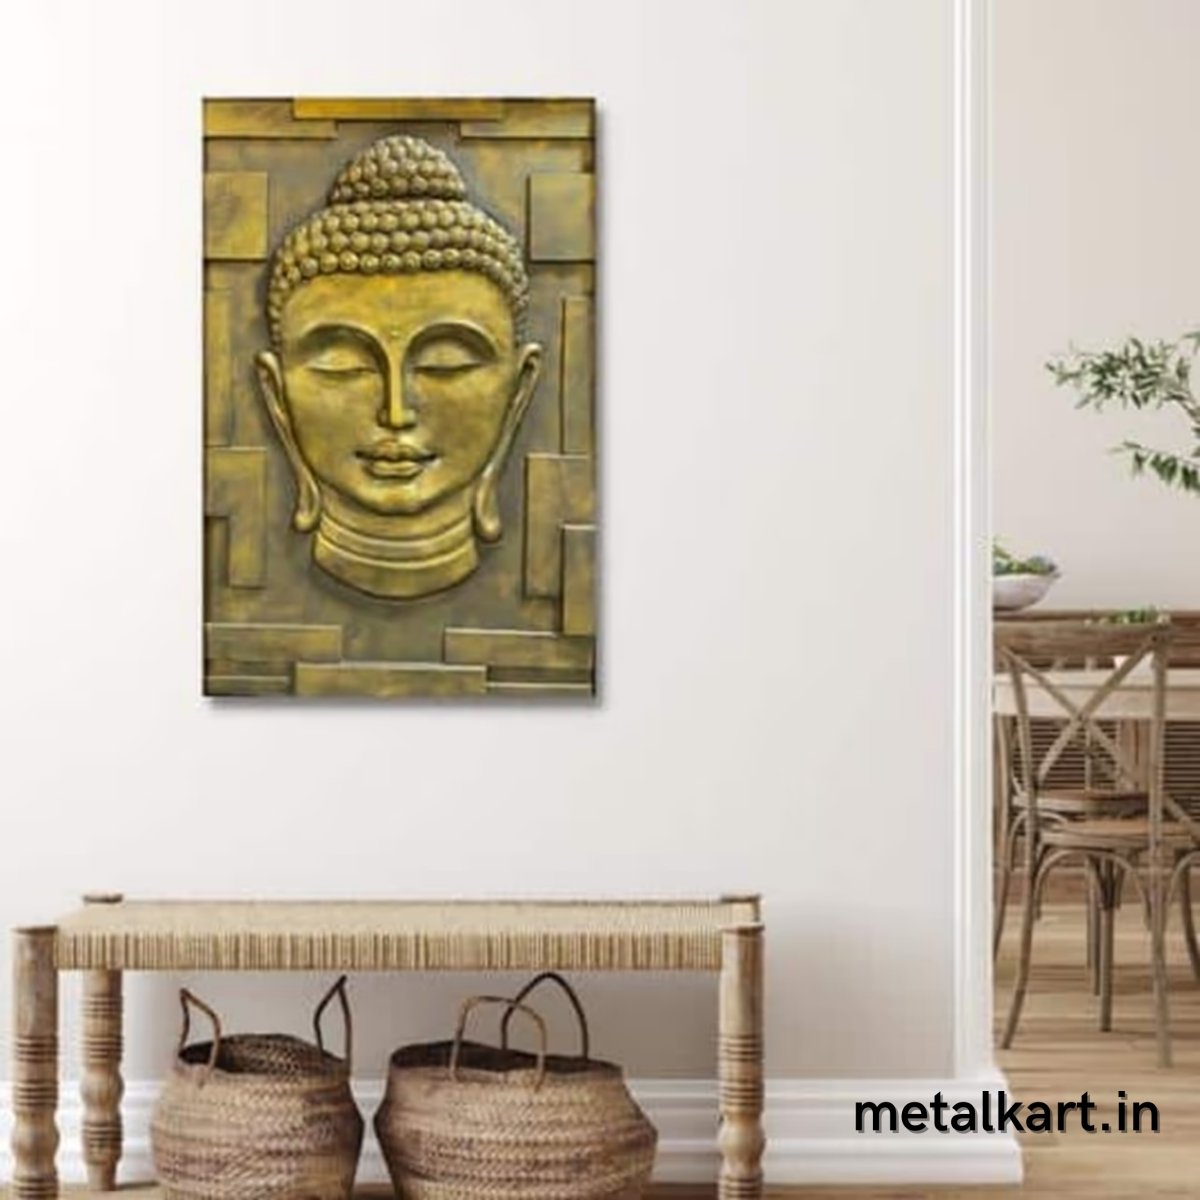 Handpainted Buddha Face 3D Wall Hanging (36 x 24 Inches)